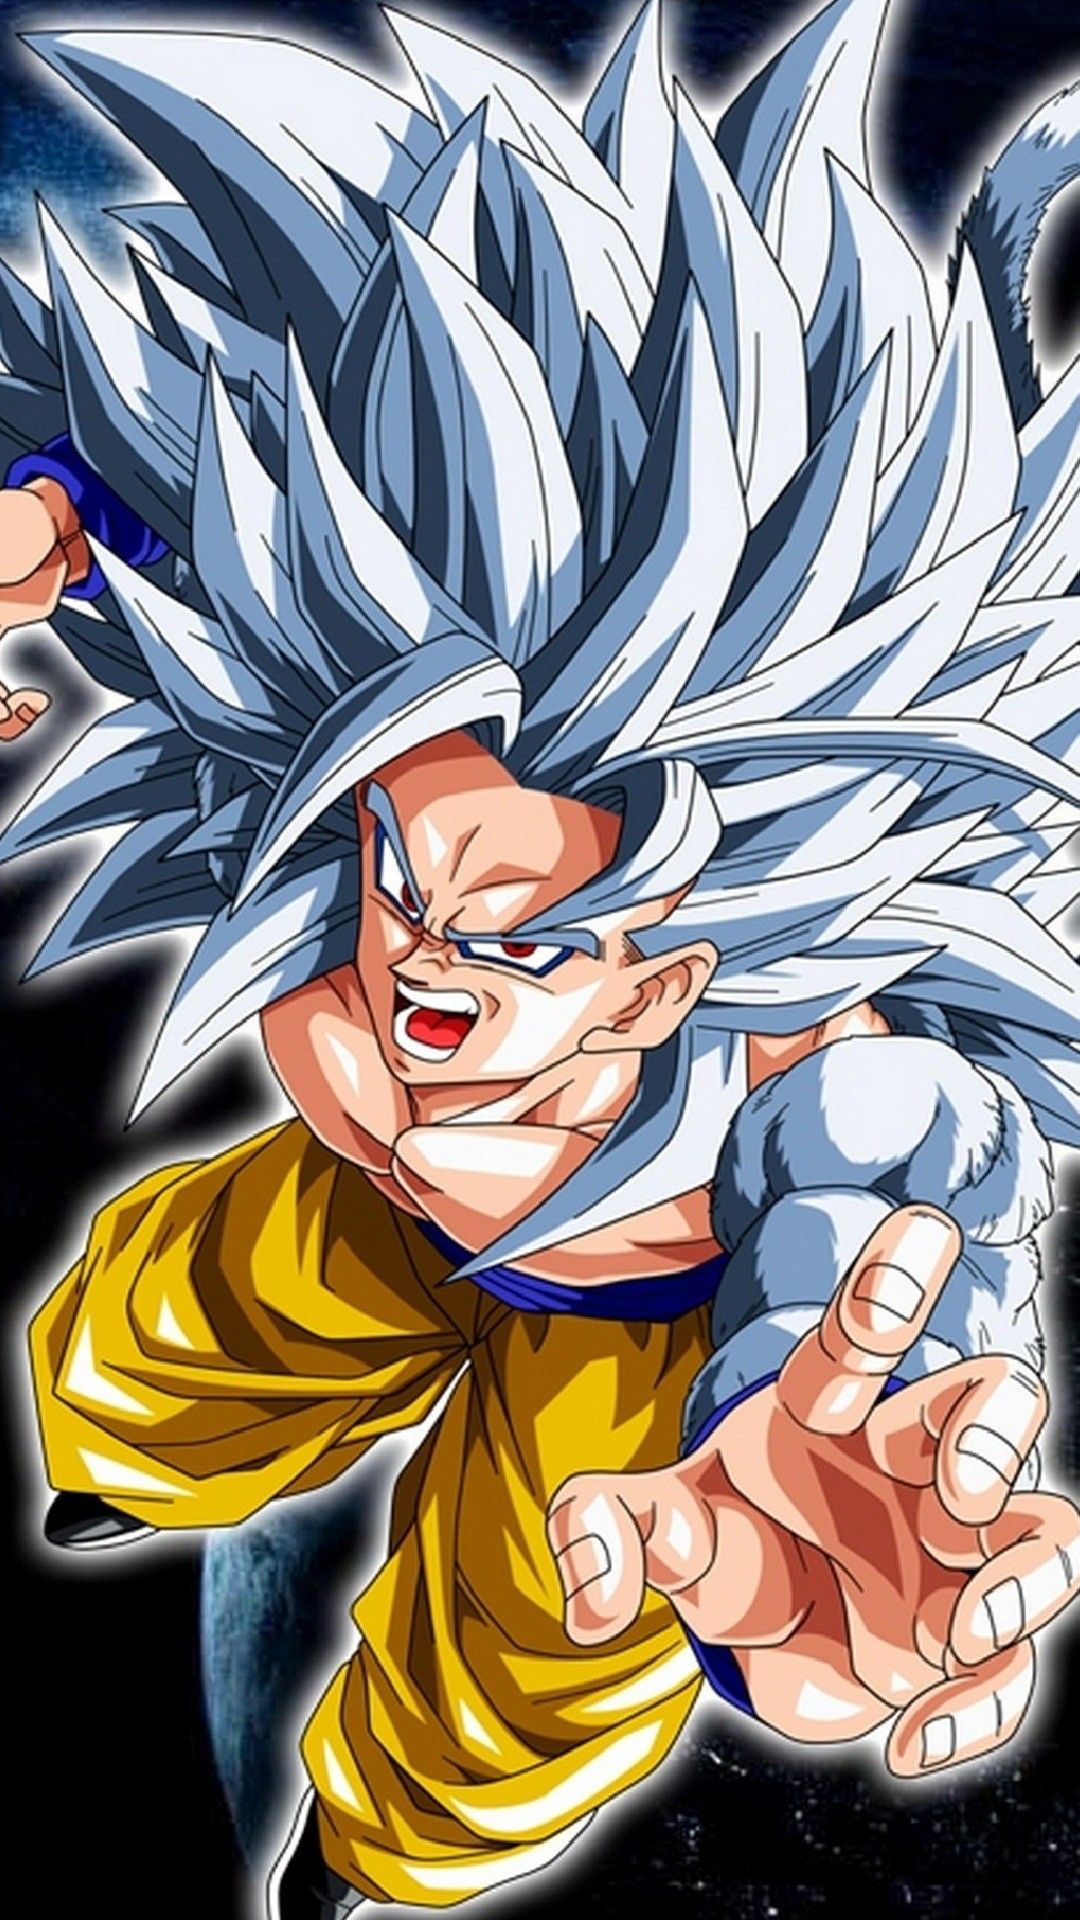 Dragon Ball Z Iphone 5 Wallpapers posted by Sarah Johnson